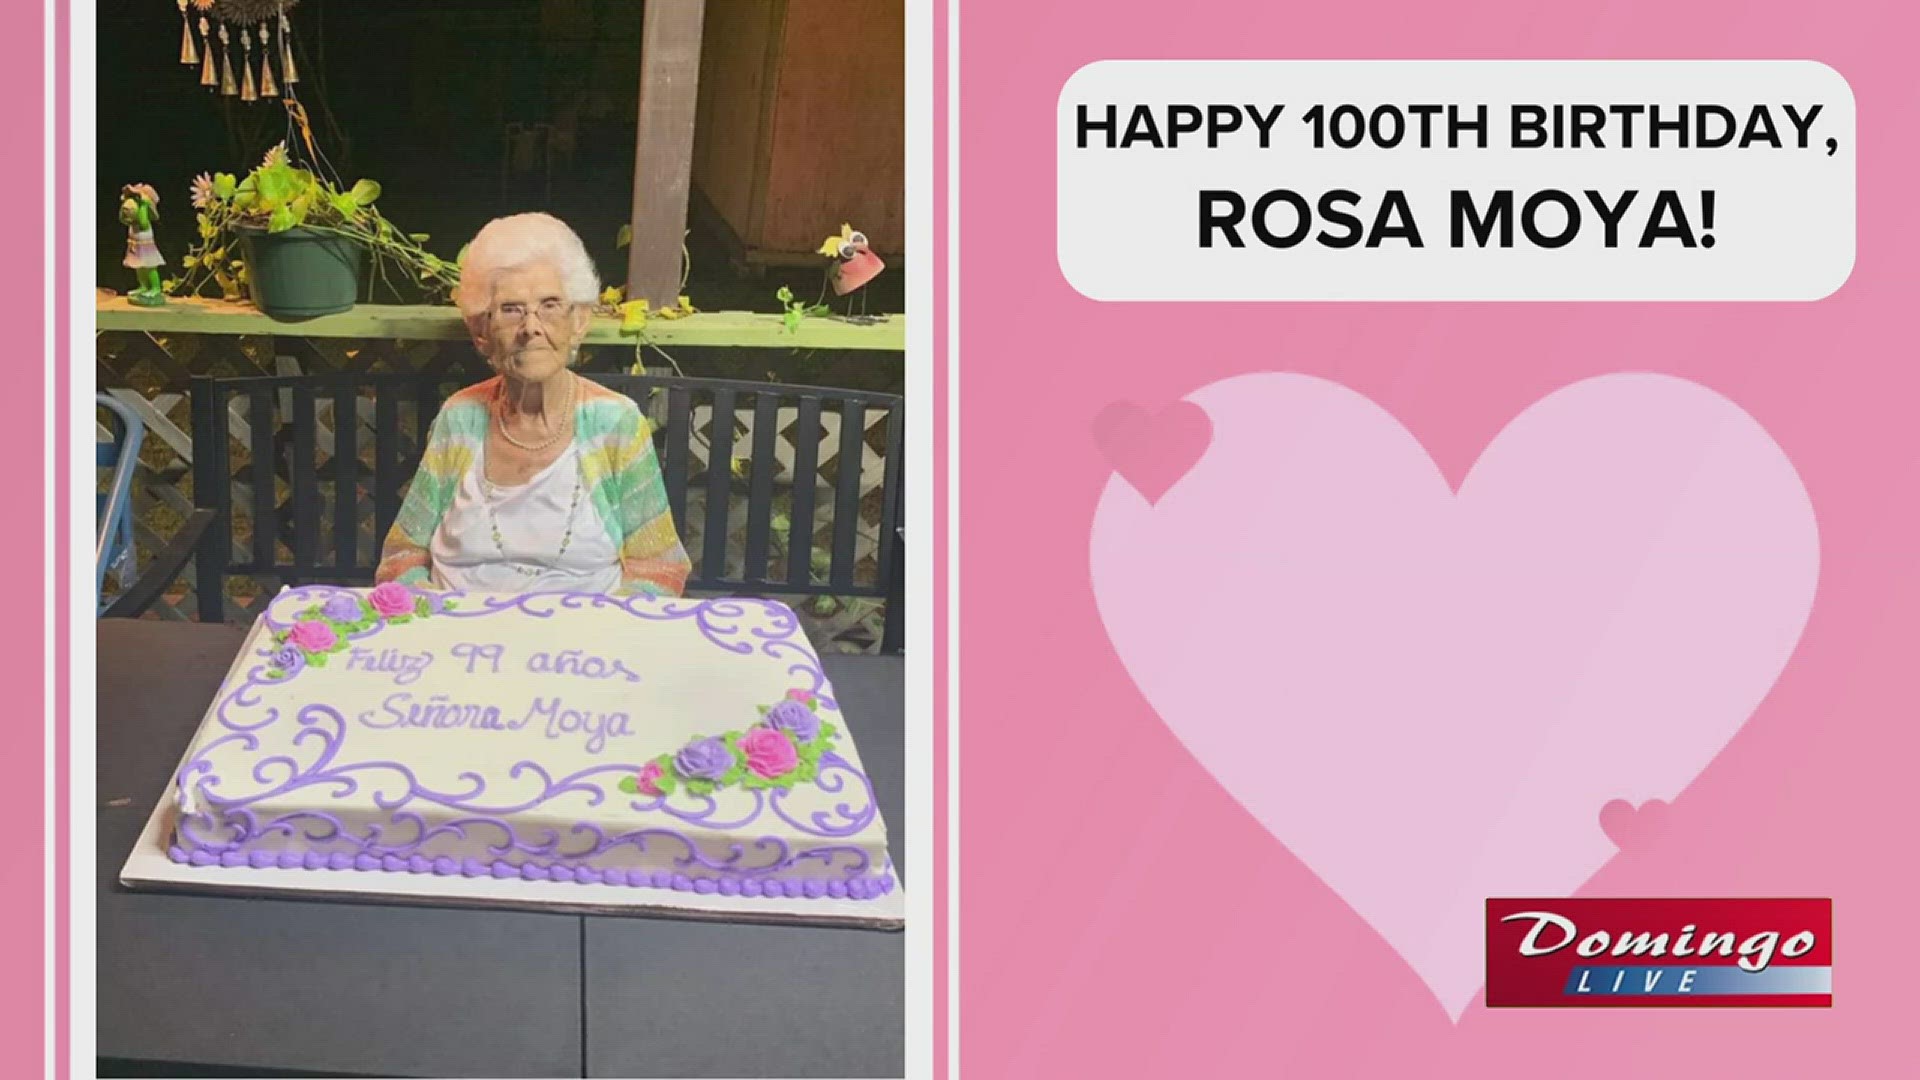 Thank you to everyone for watching and sending us such thoughtful gifts – and happy 100th birthday to the greatest gift of all, Rosa Moya!